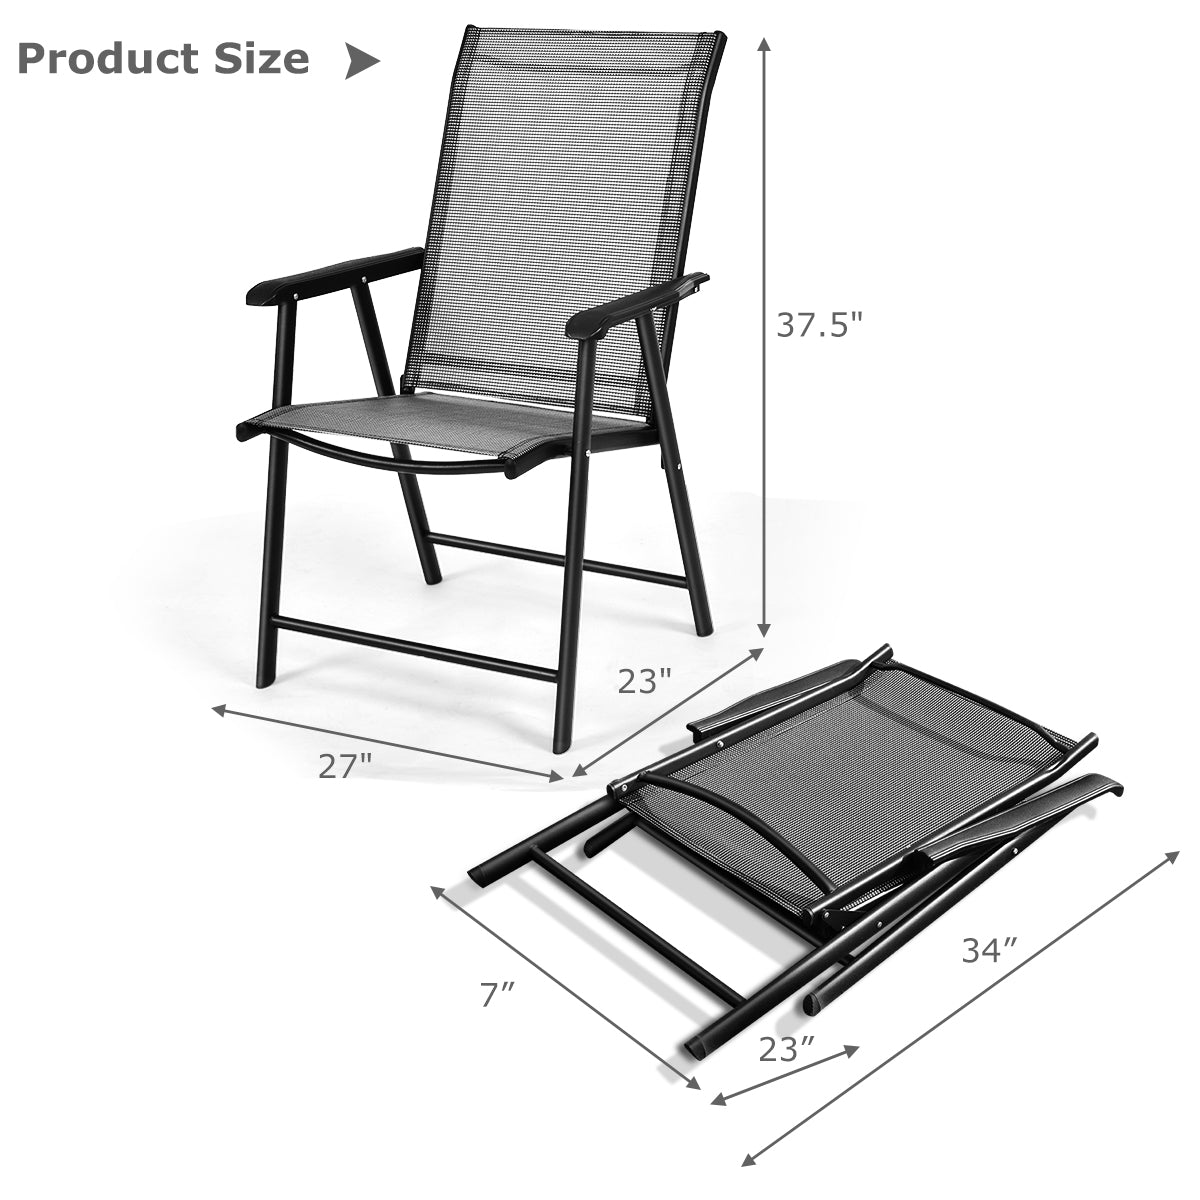 Giantex Set of 2 Patio Dining Chairs, Outdoor Chairs, Portable Folding Chairs (Grey)